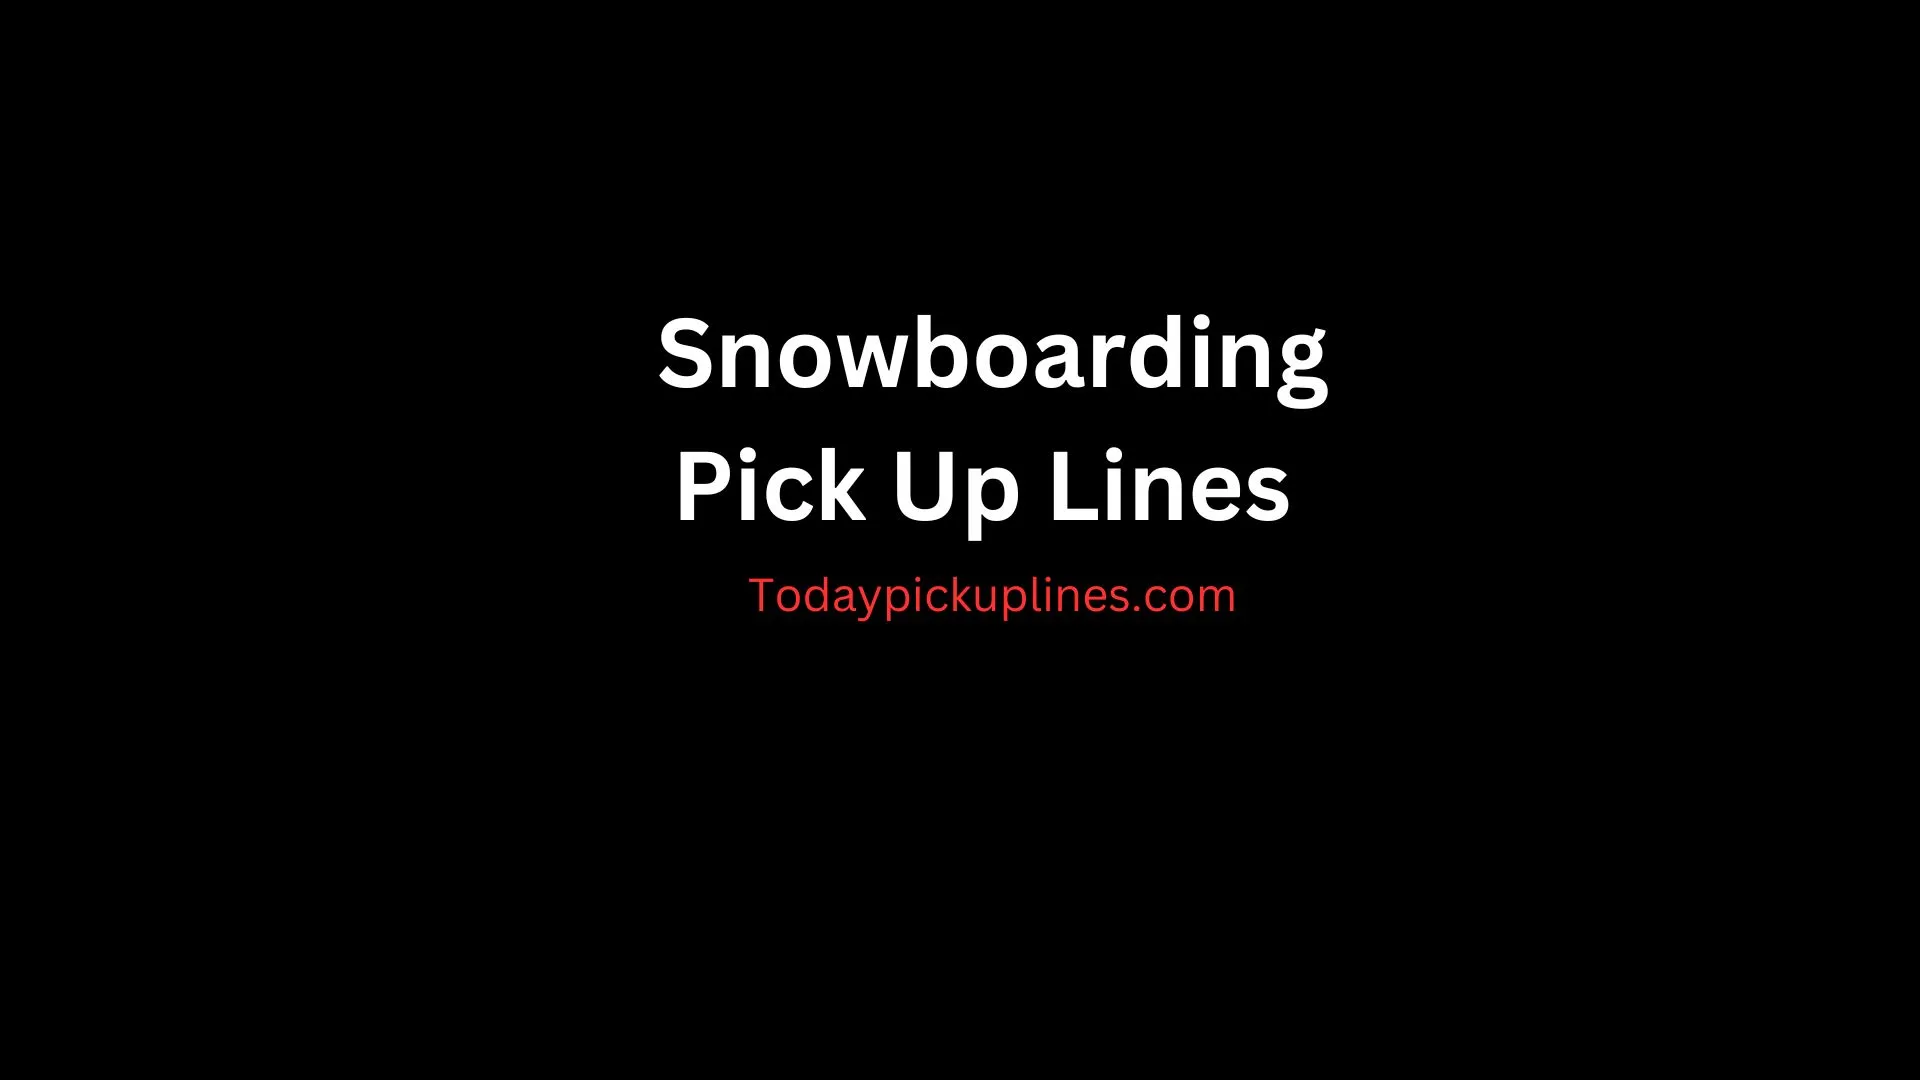 Snowboarding Pick Up Lines